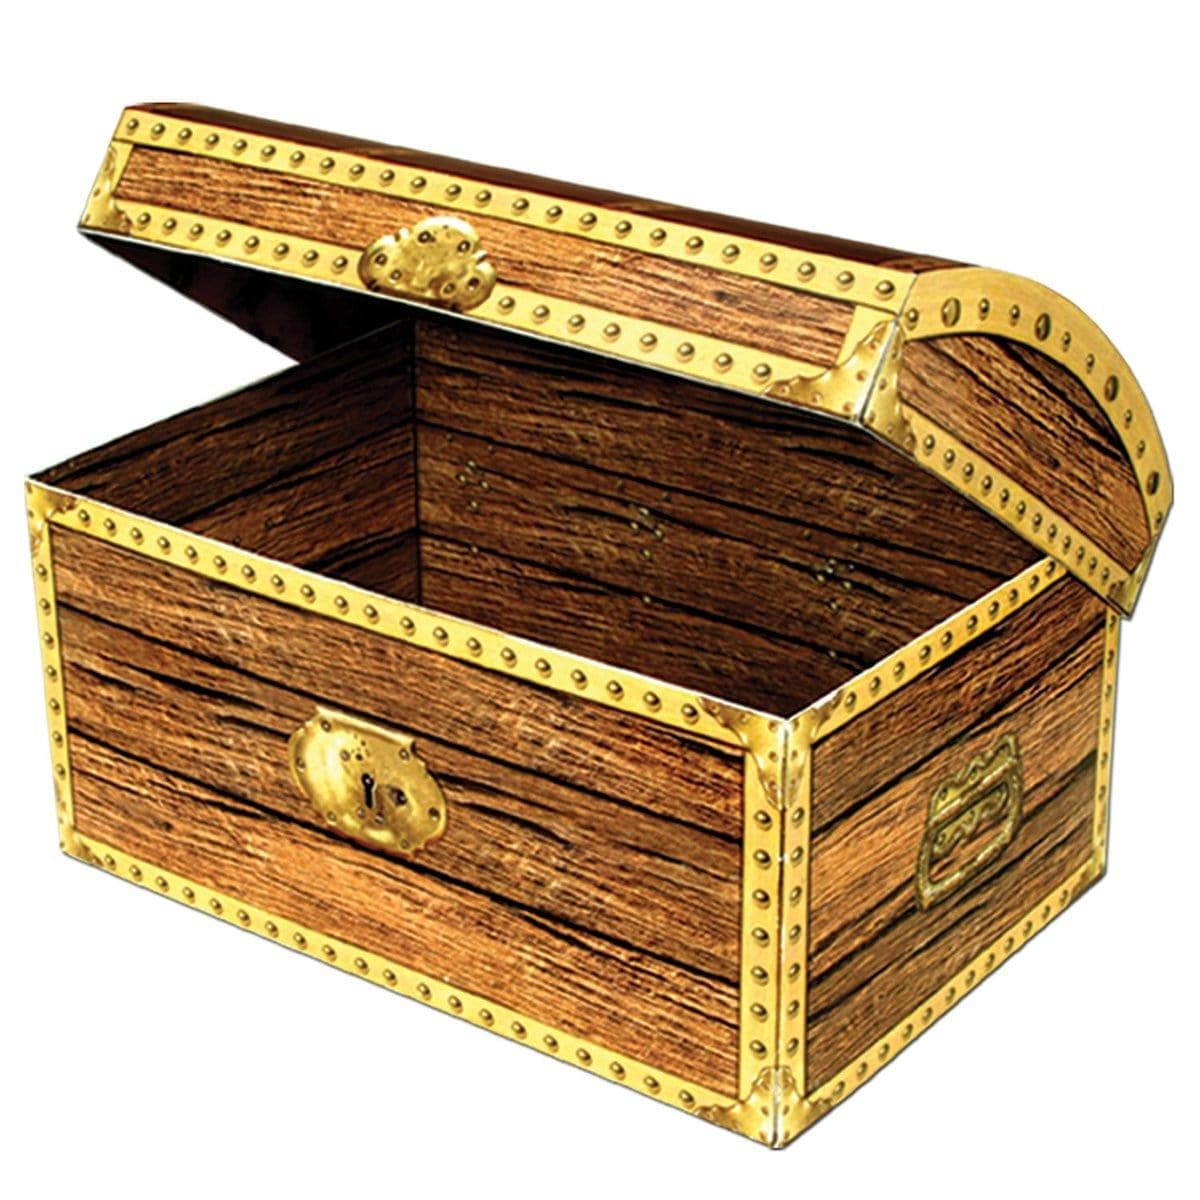 Buy Theme Party Large Treasure Chest Box sold at Party Expert